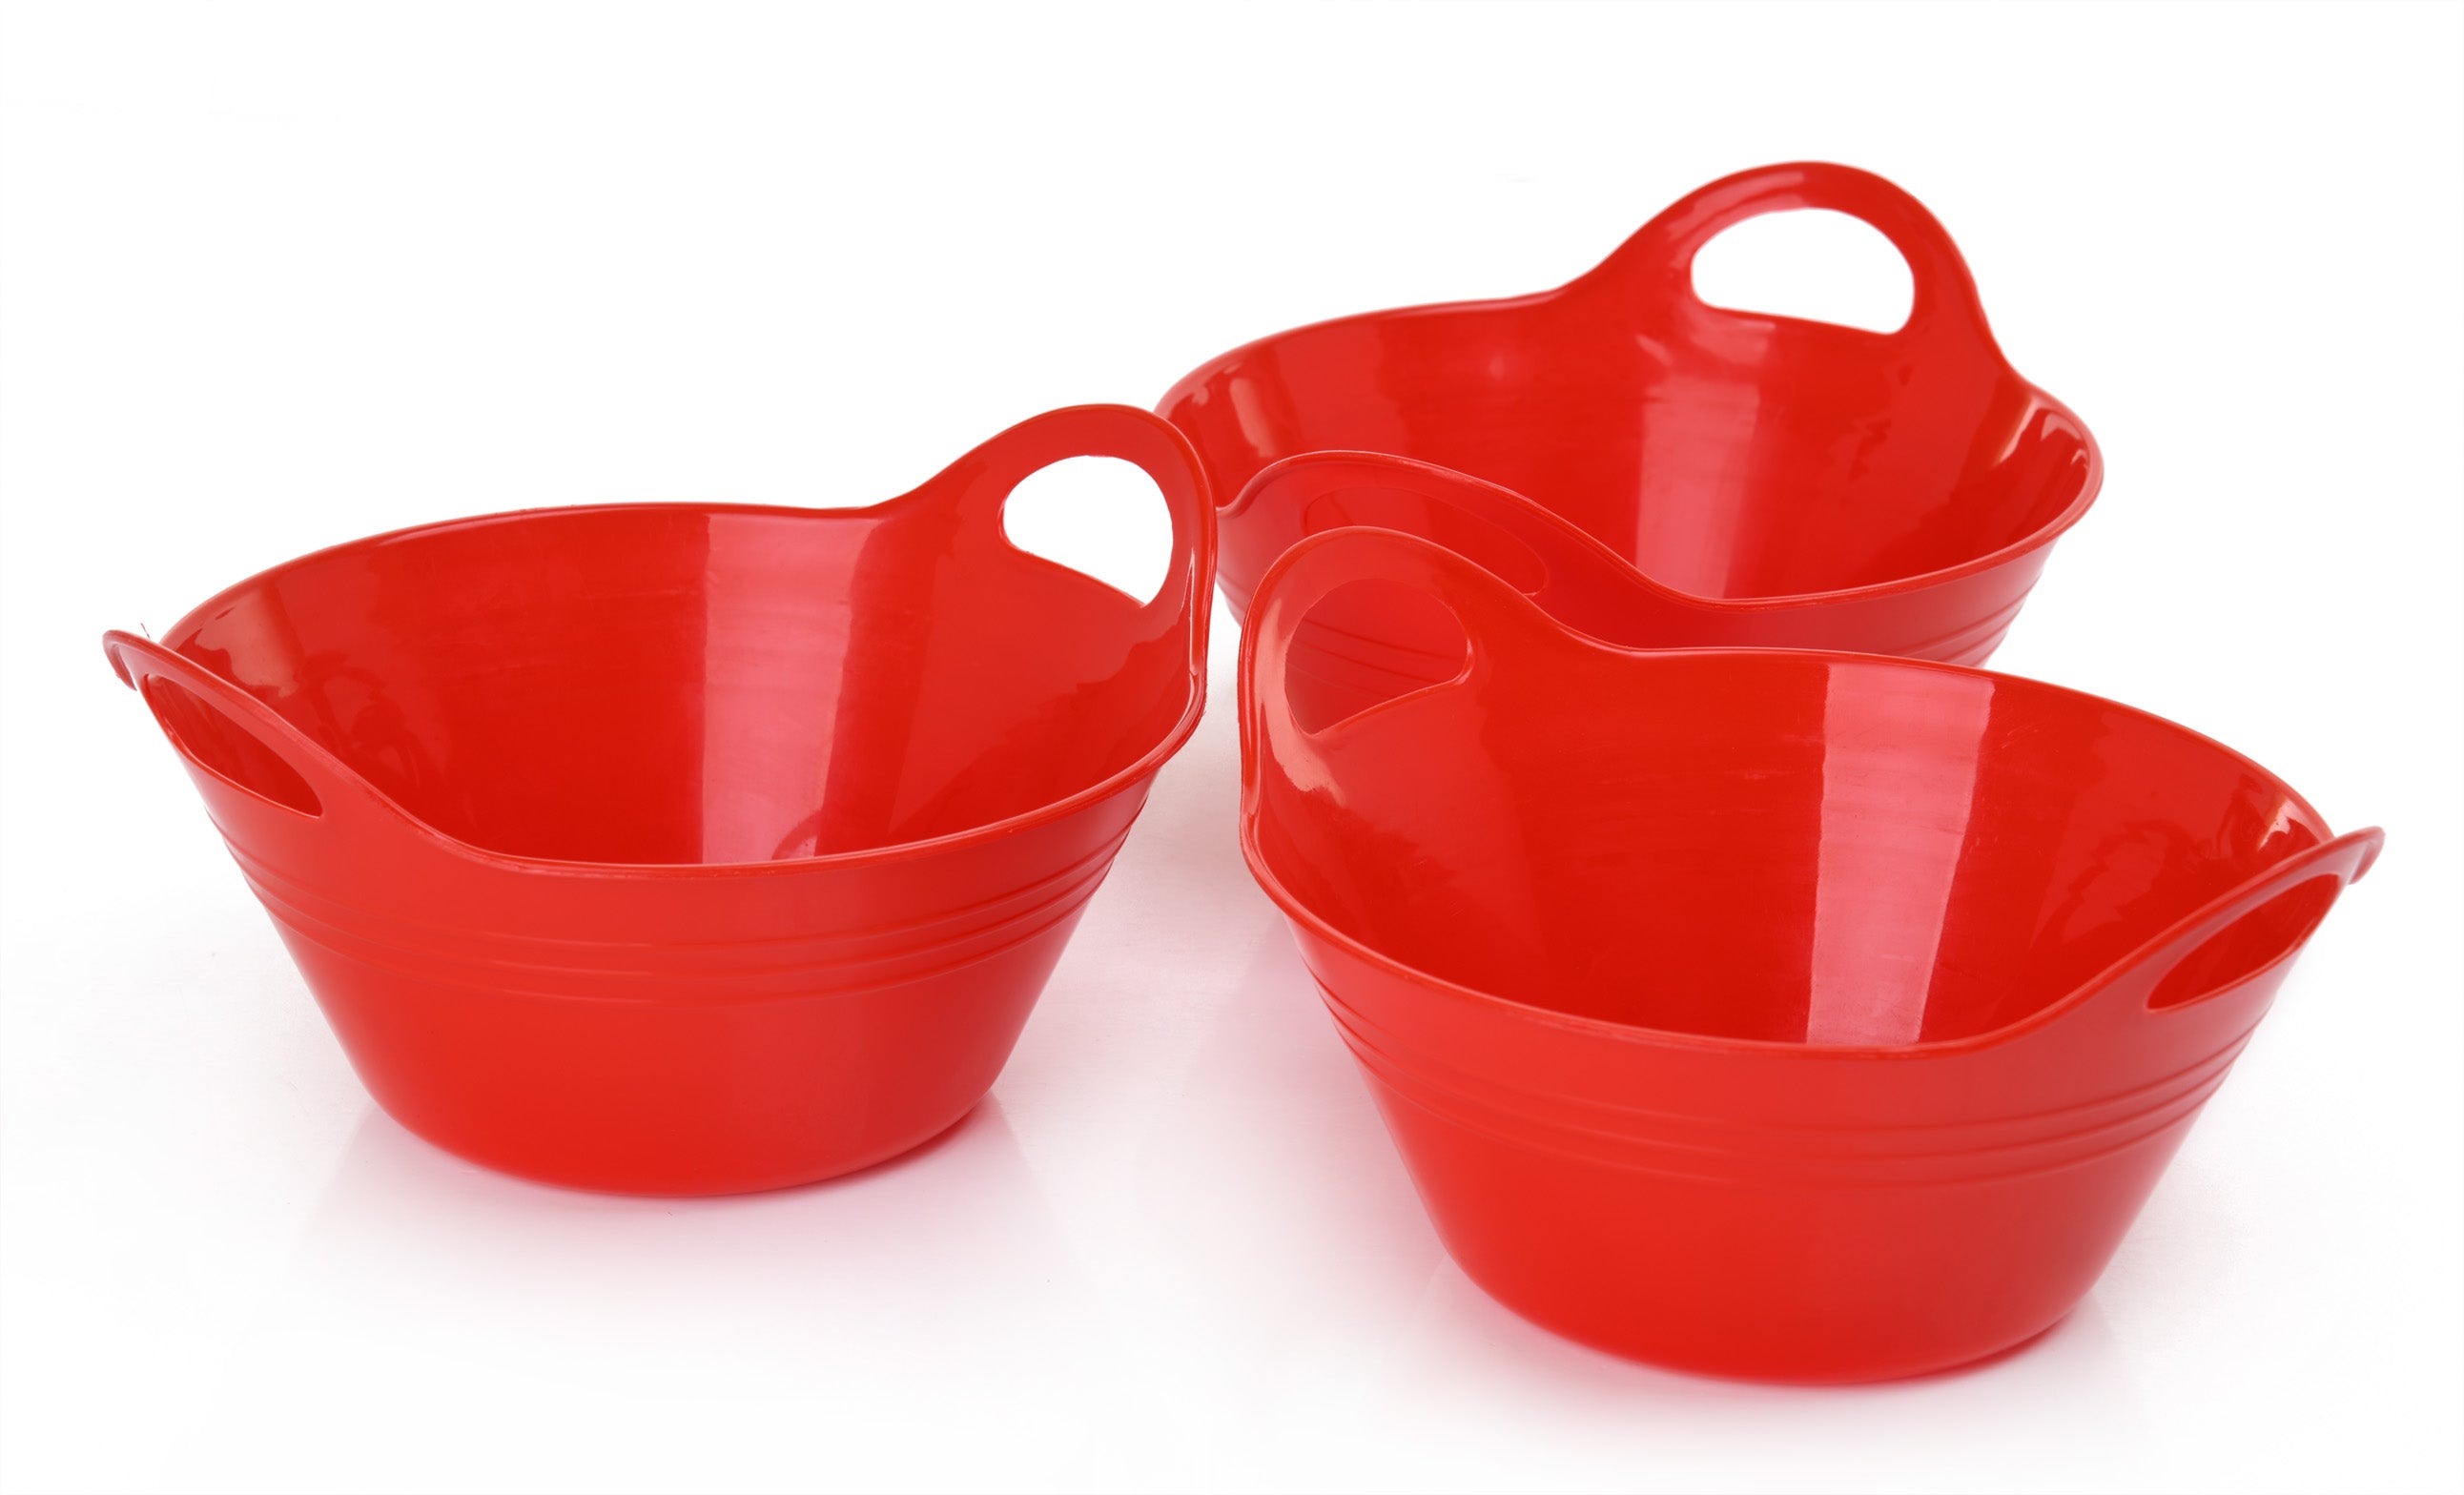 Mintra Home Plastic Bowls with Handles 3 Pack (Small , Red)